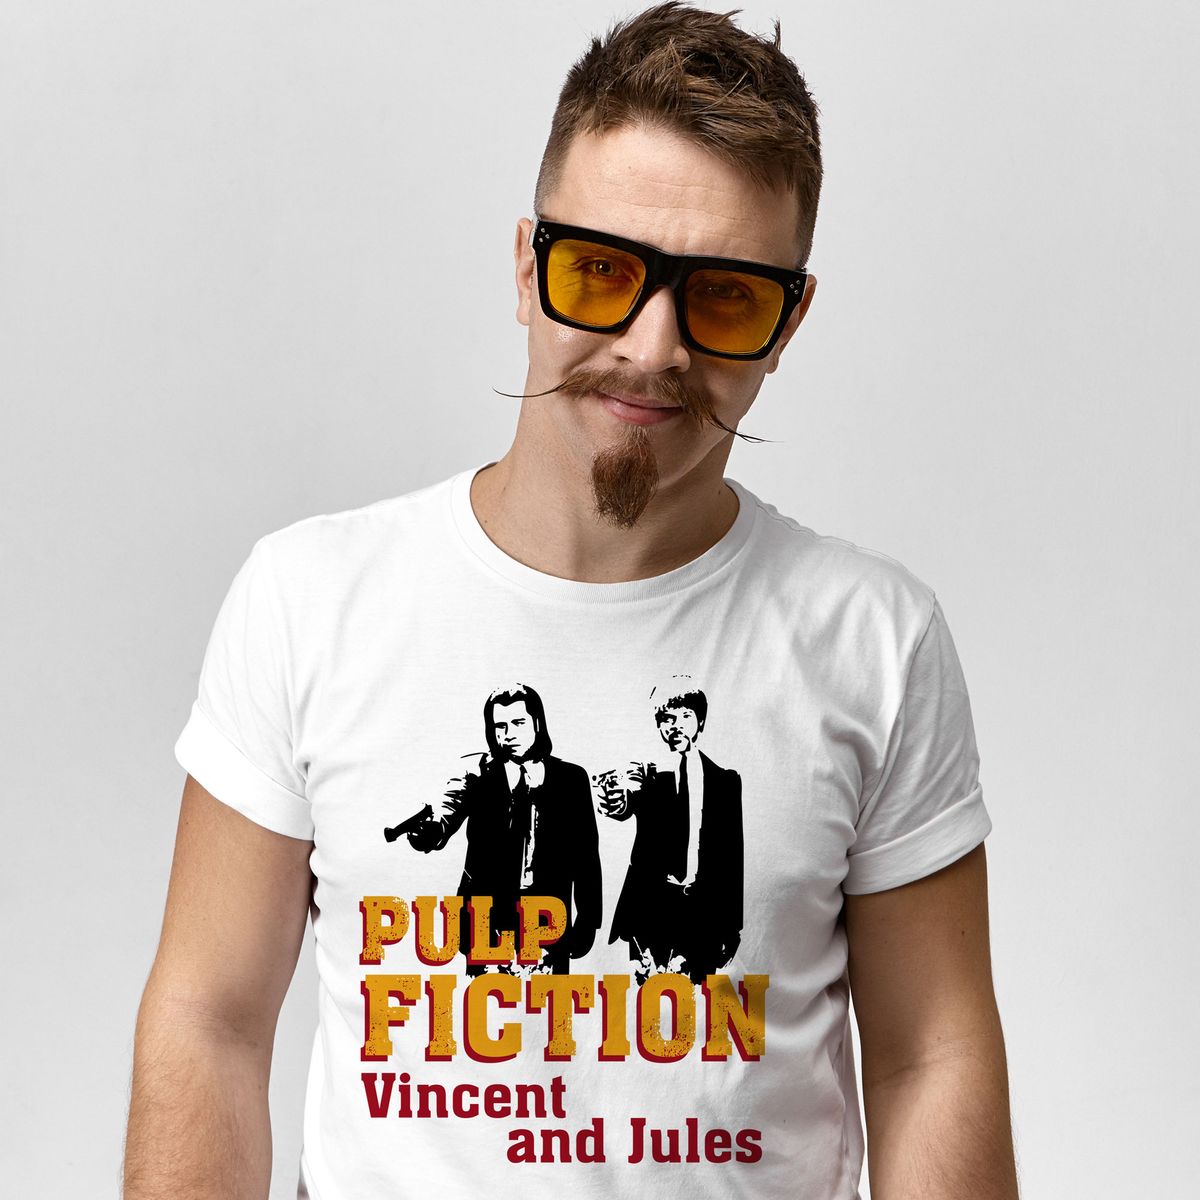 Nome do produto: Pulp Fiction - Vicent and Jules